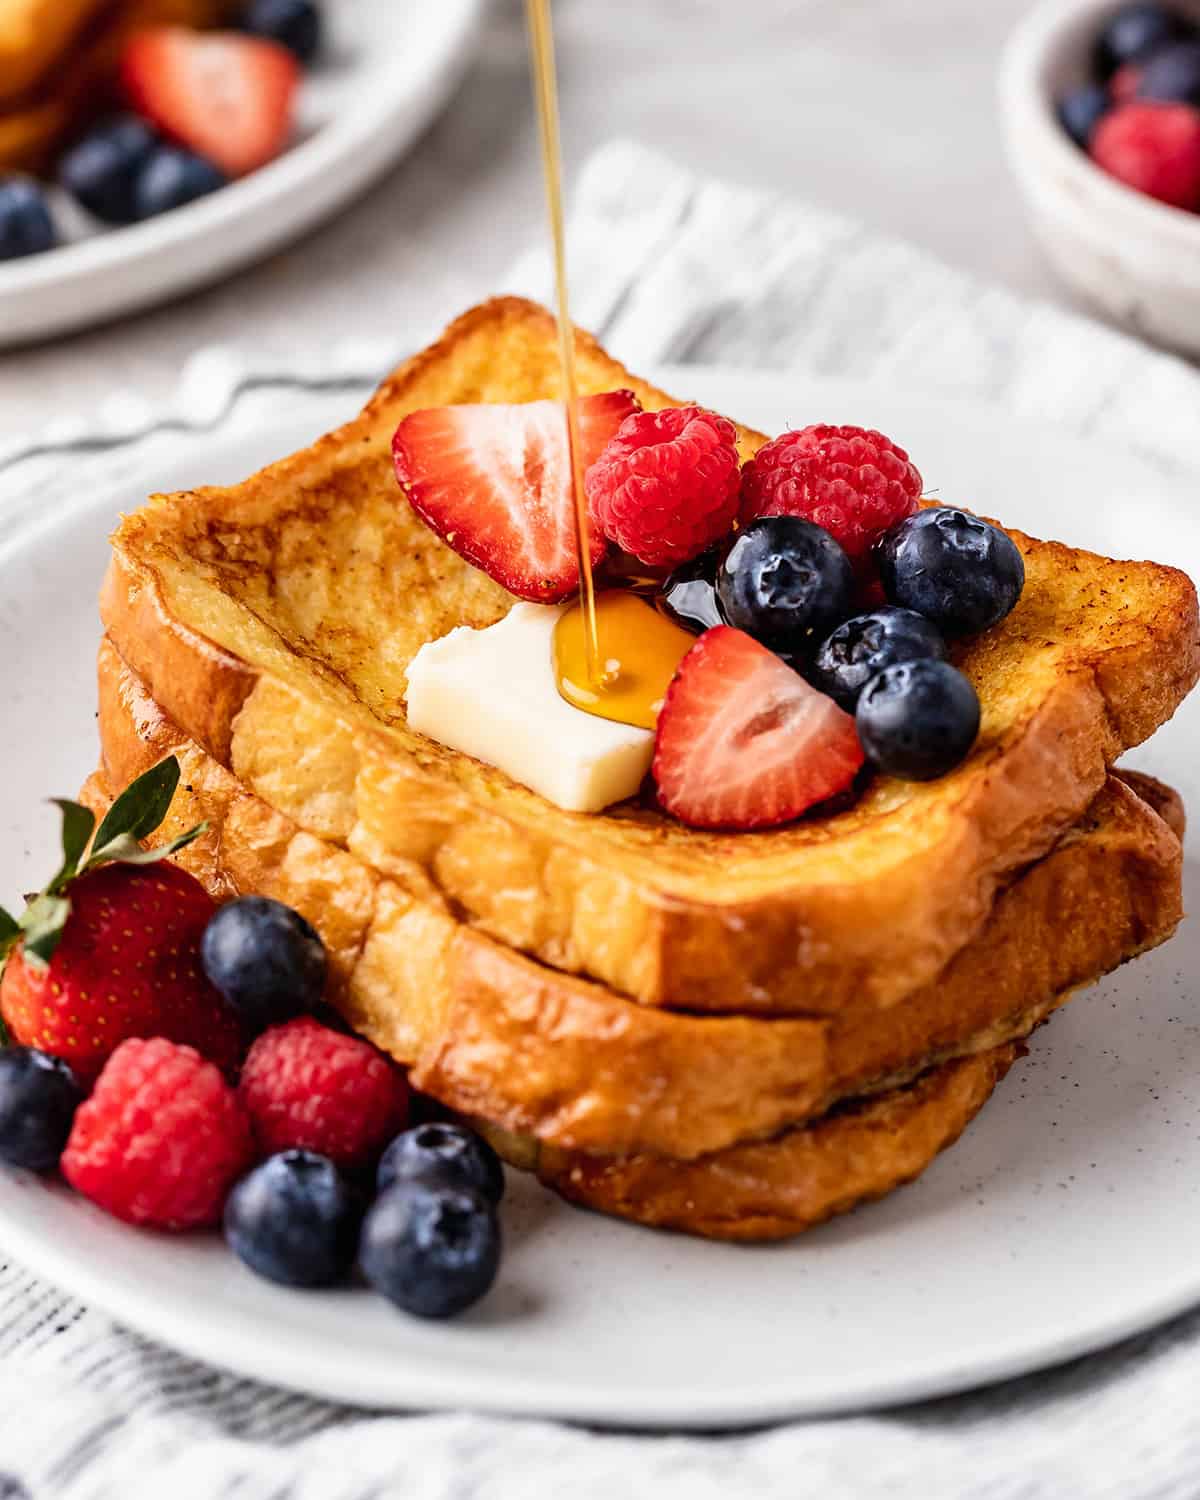 syrup being poured onto a stack of 3 pieces of French Toast with butter and berries